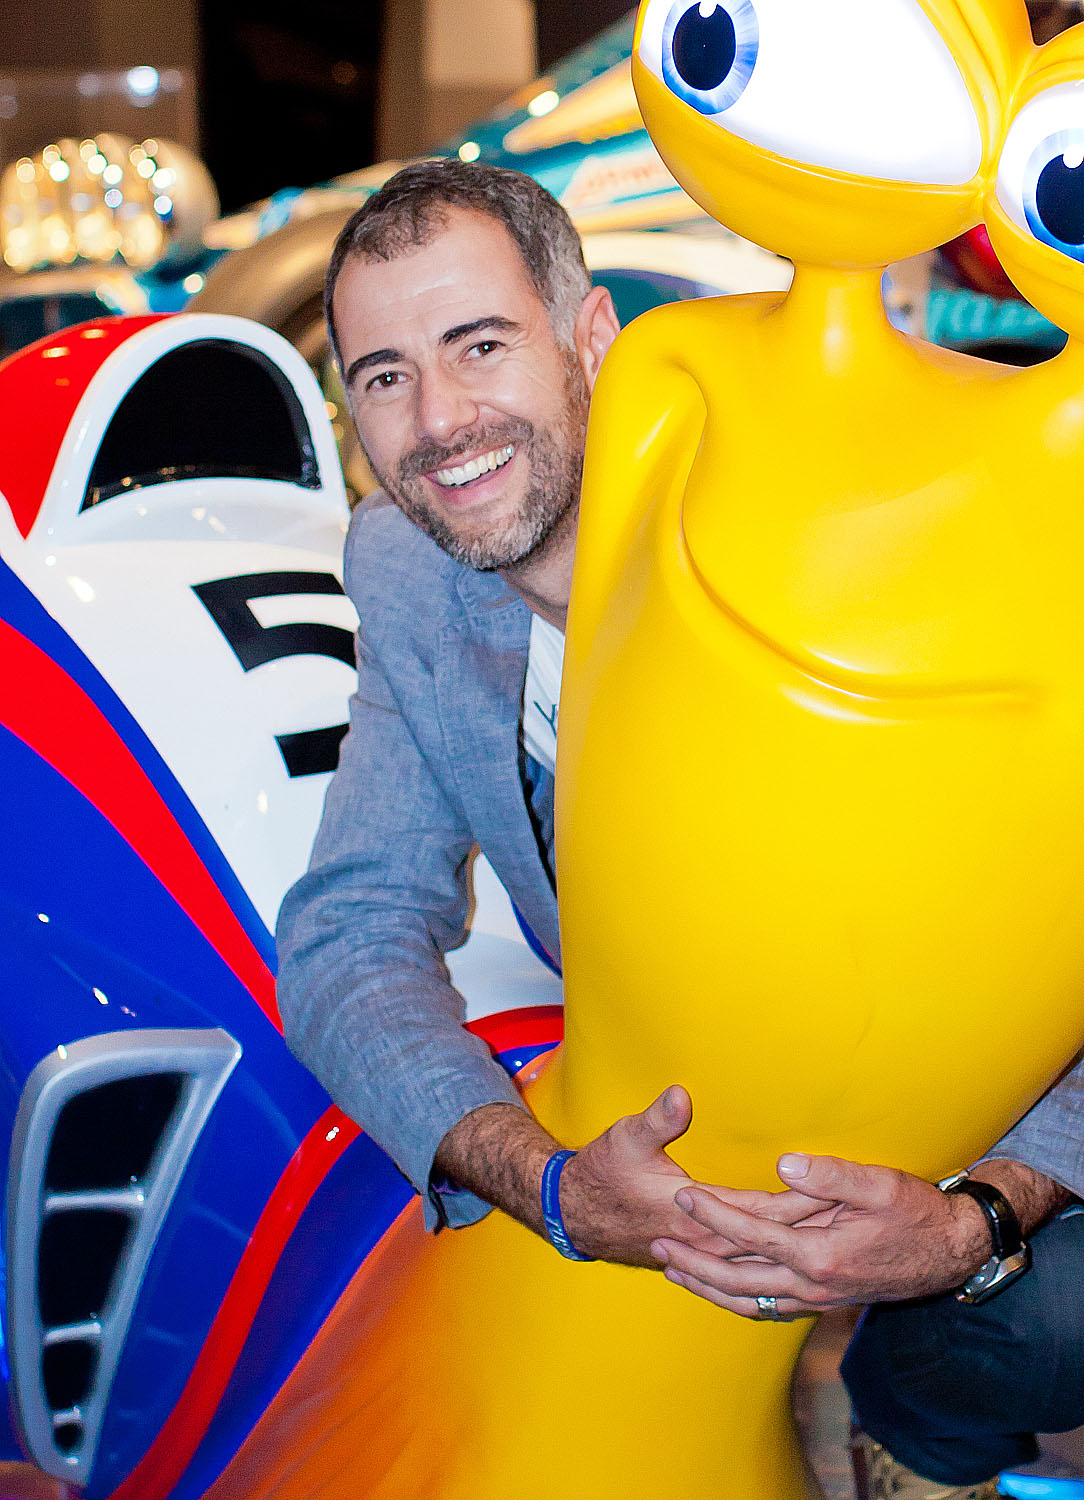 Designer Daniel Simon at the Dreamworks 'Turbo' cast & crew party at the Petersen Museum, Los Angeles.